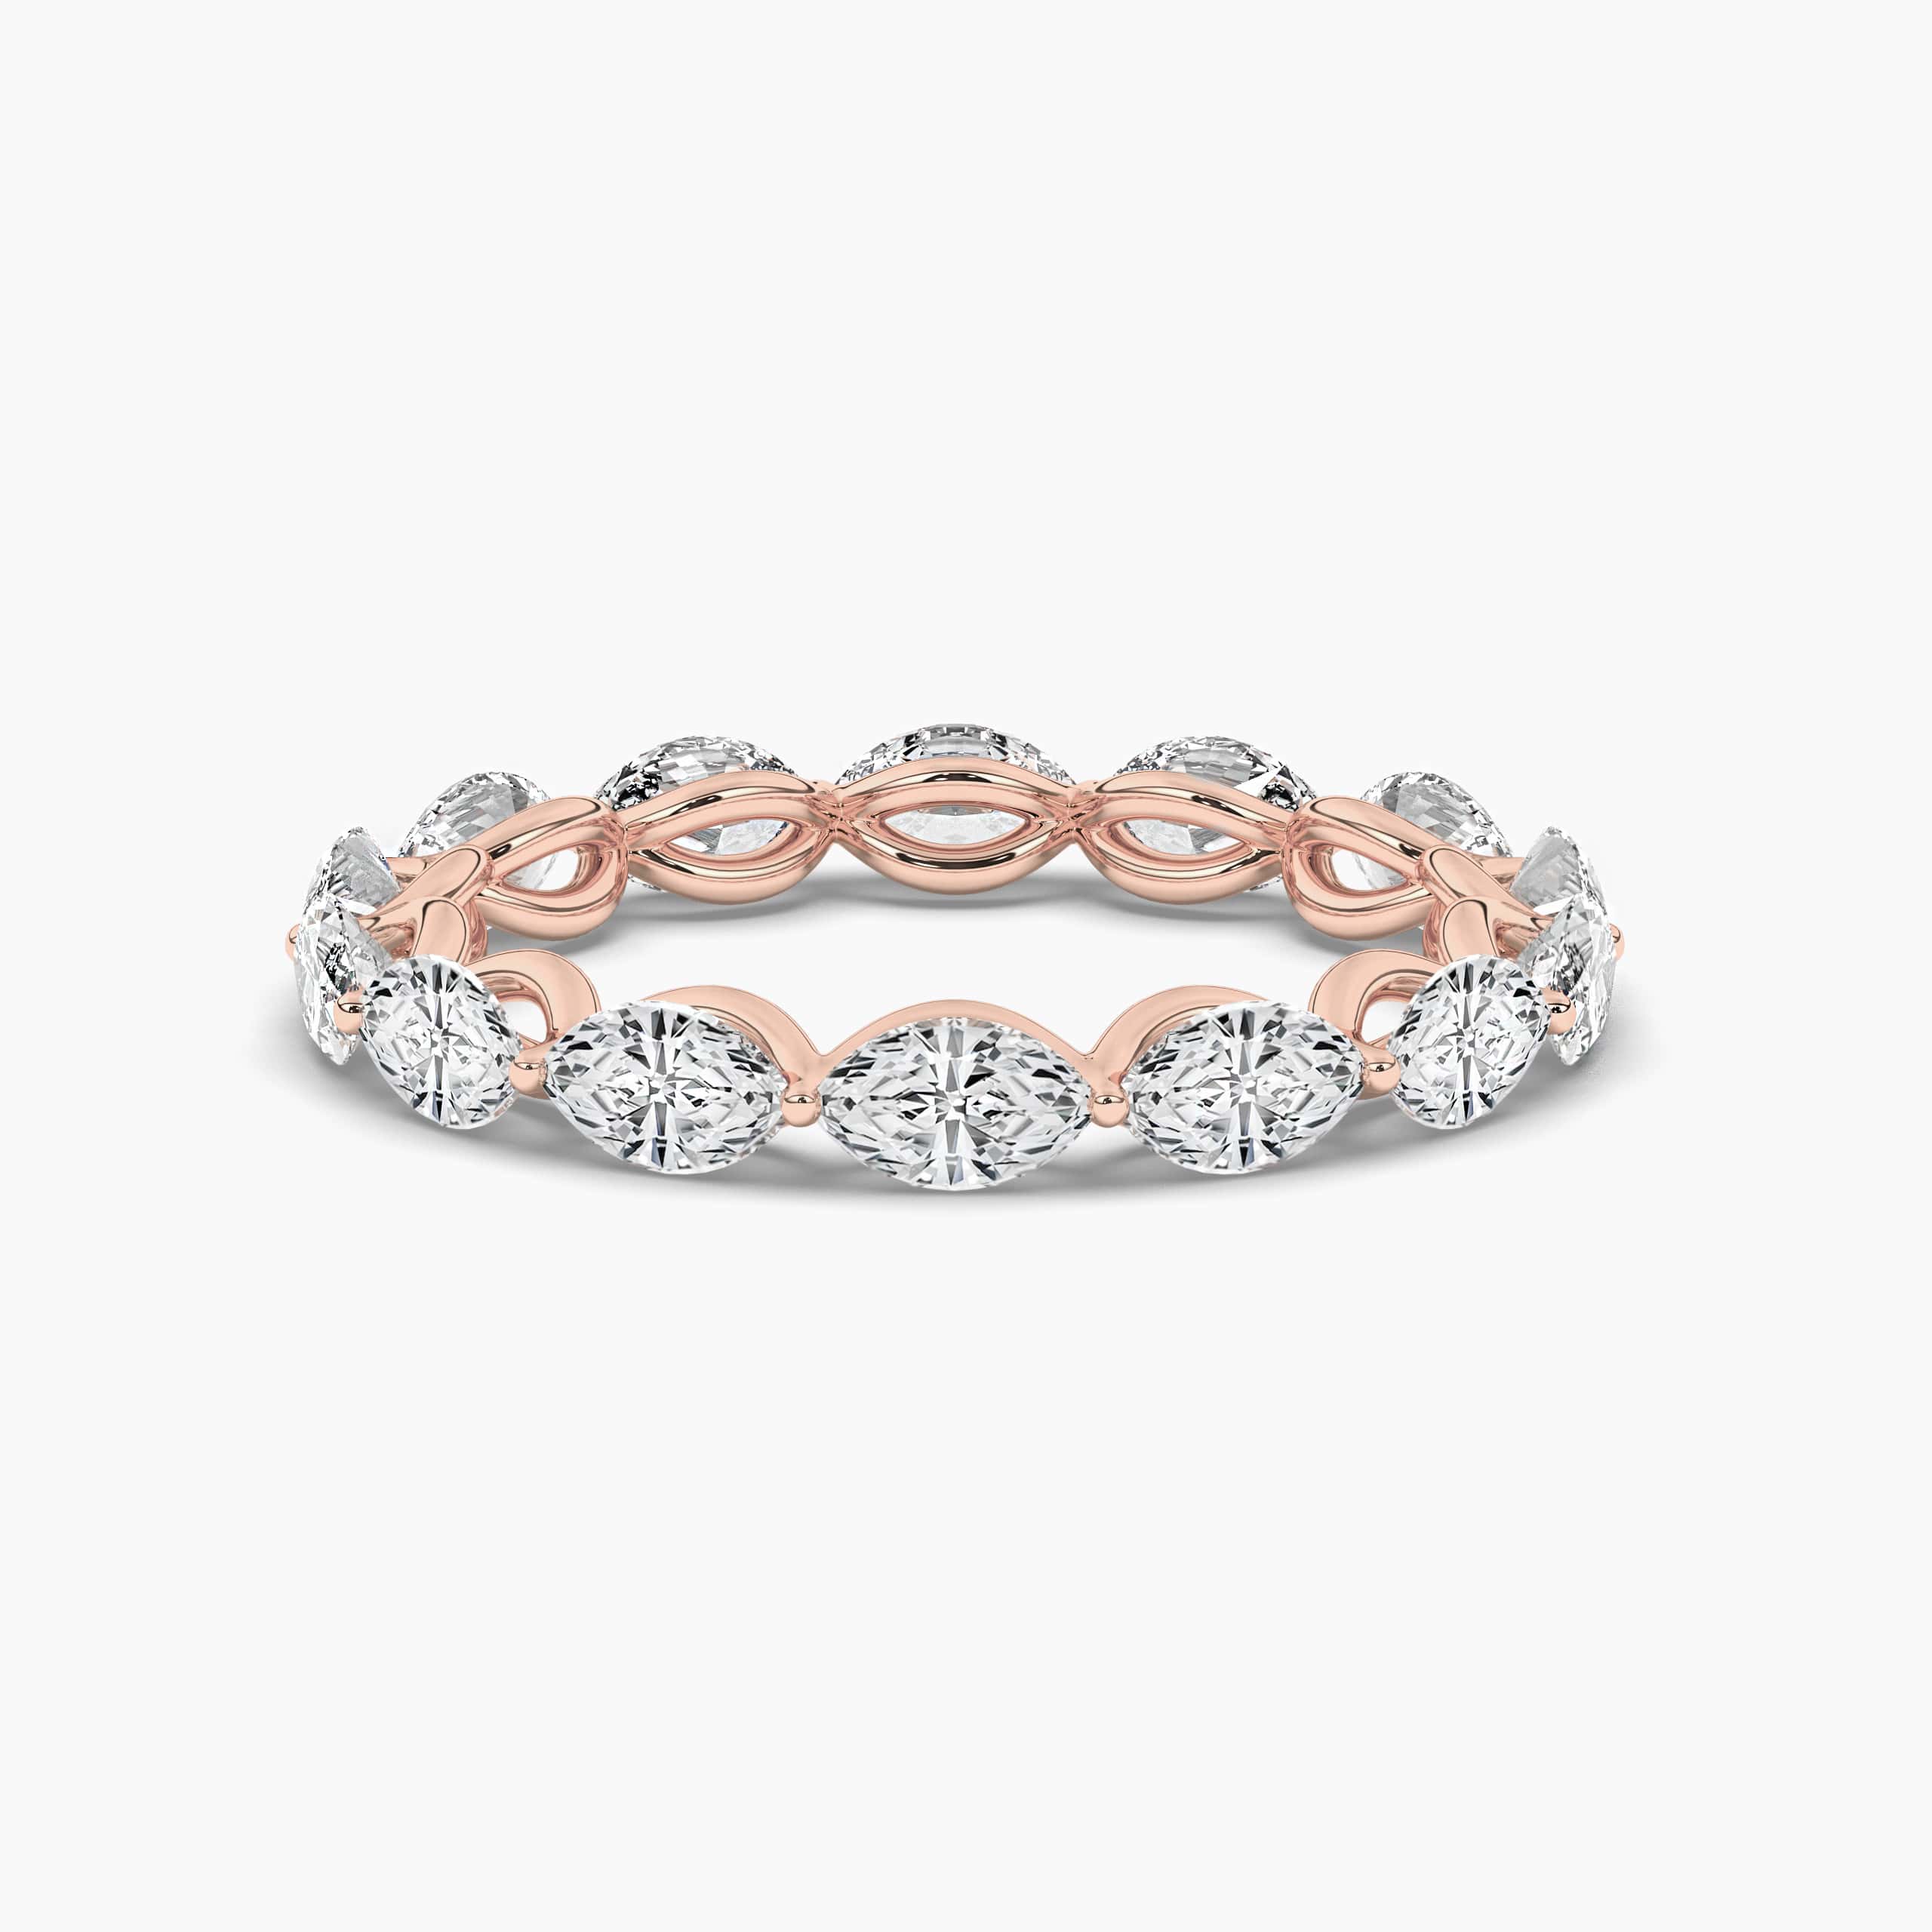 Marquise Diamond Eternity Bands with White Diamond in Rose Gold